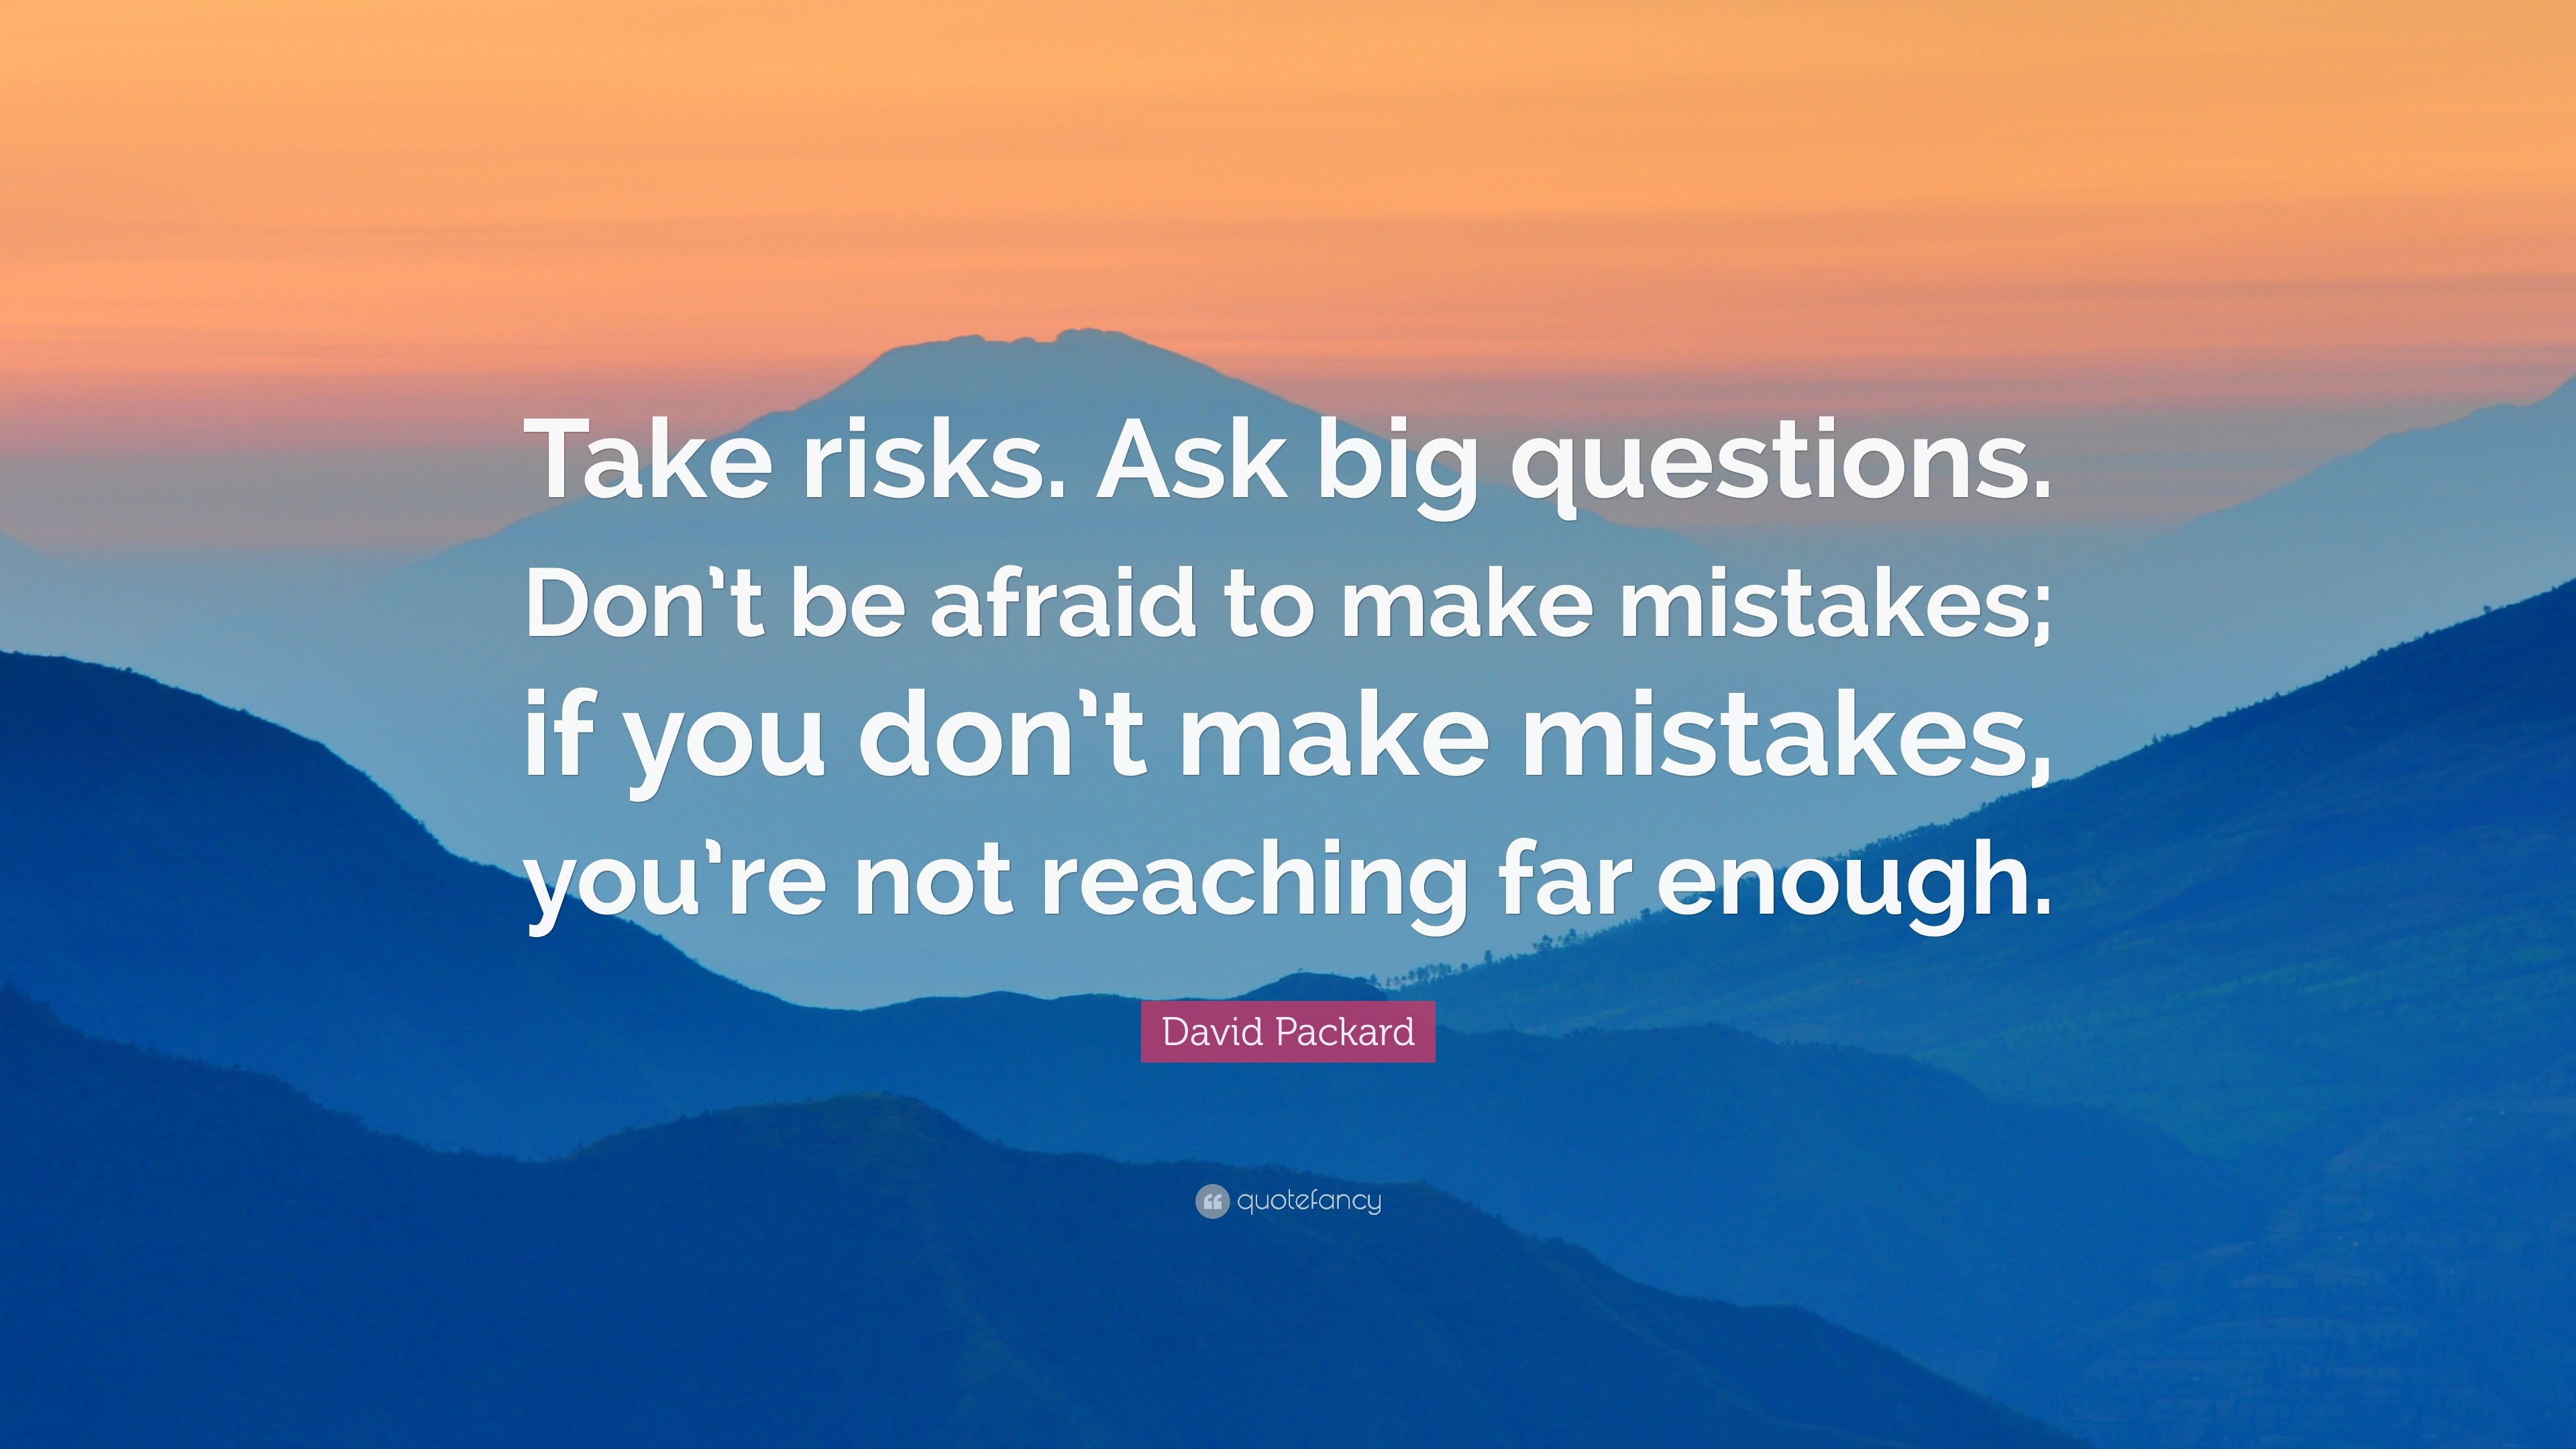 David Packard Quote Take Risks Ask Big Questions Don T Be Afraid To Make Mistakes If You Don T Make Mistakes You Re Not Reaching Far Eno 9 Wallpapers Quotefancy